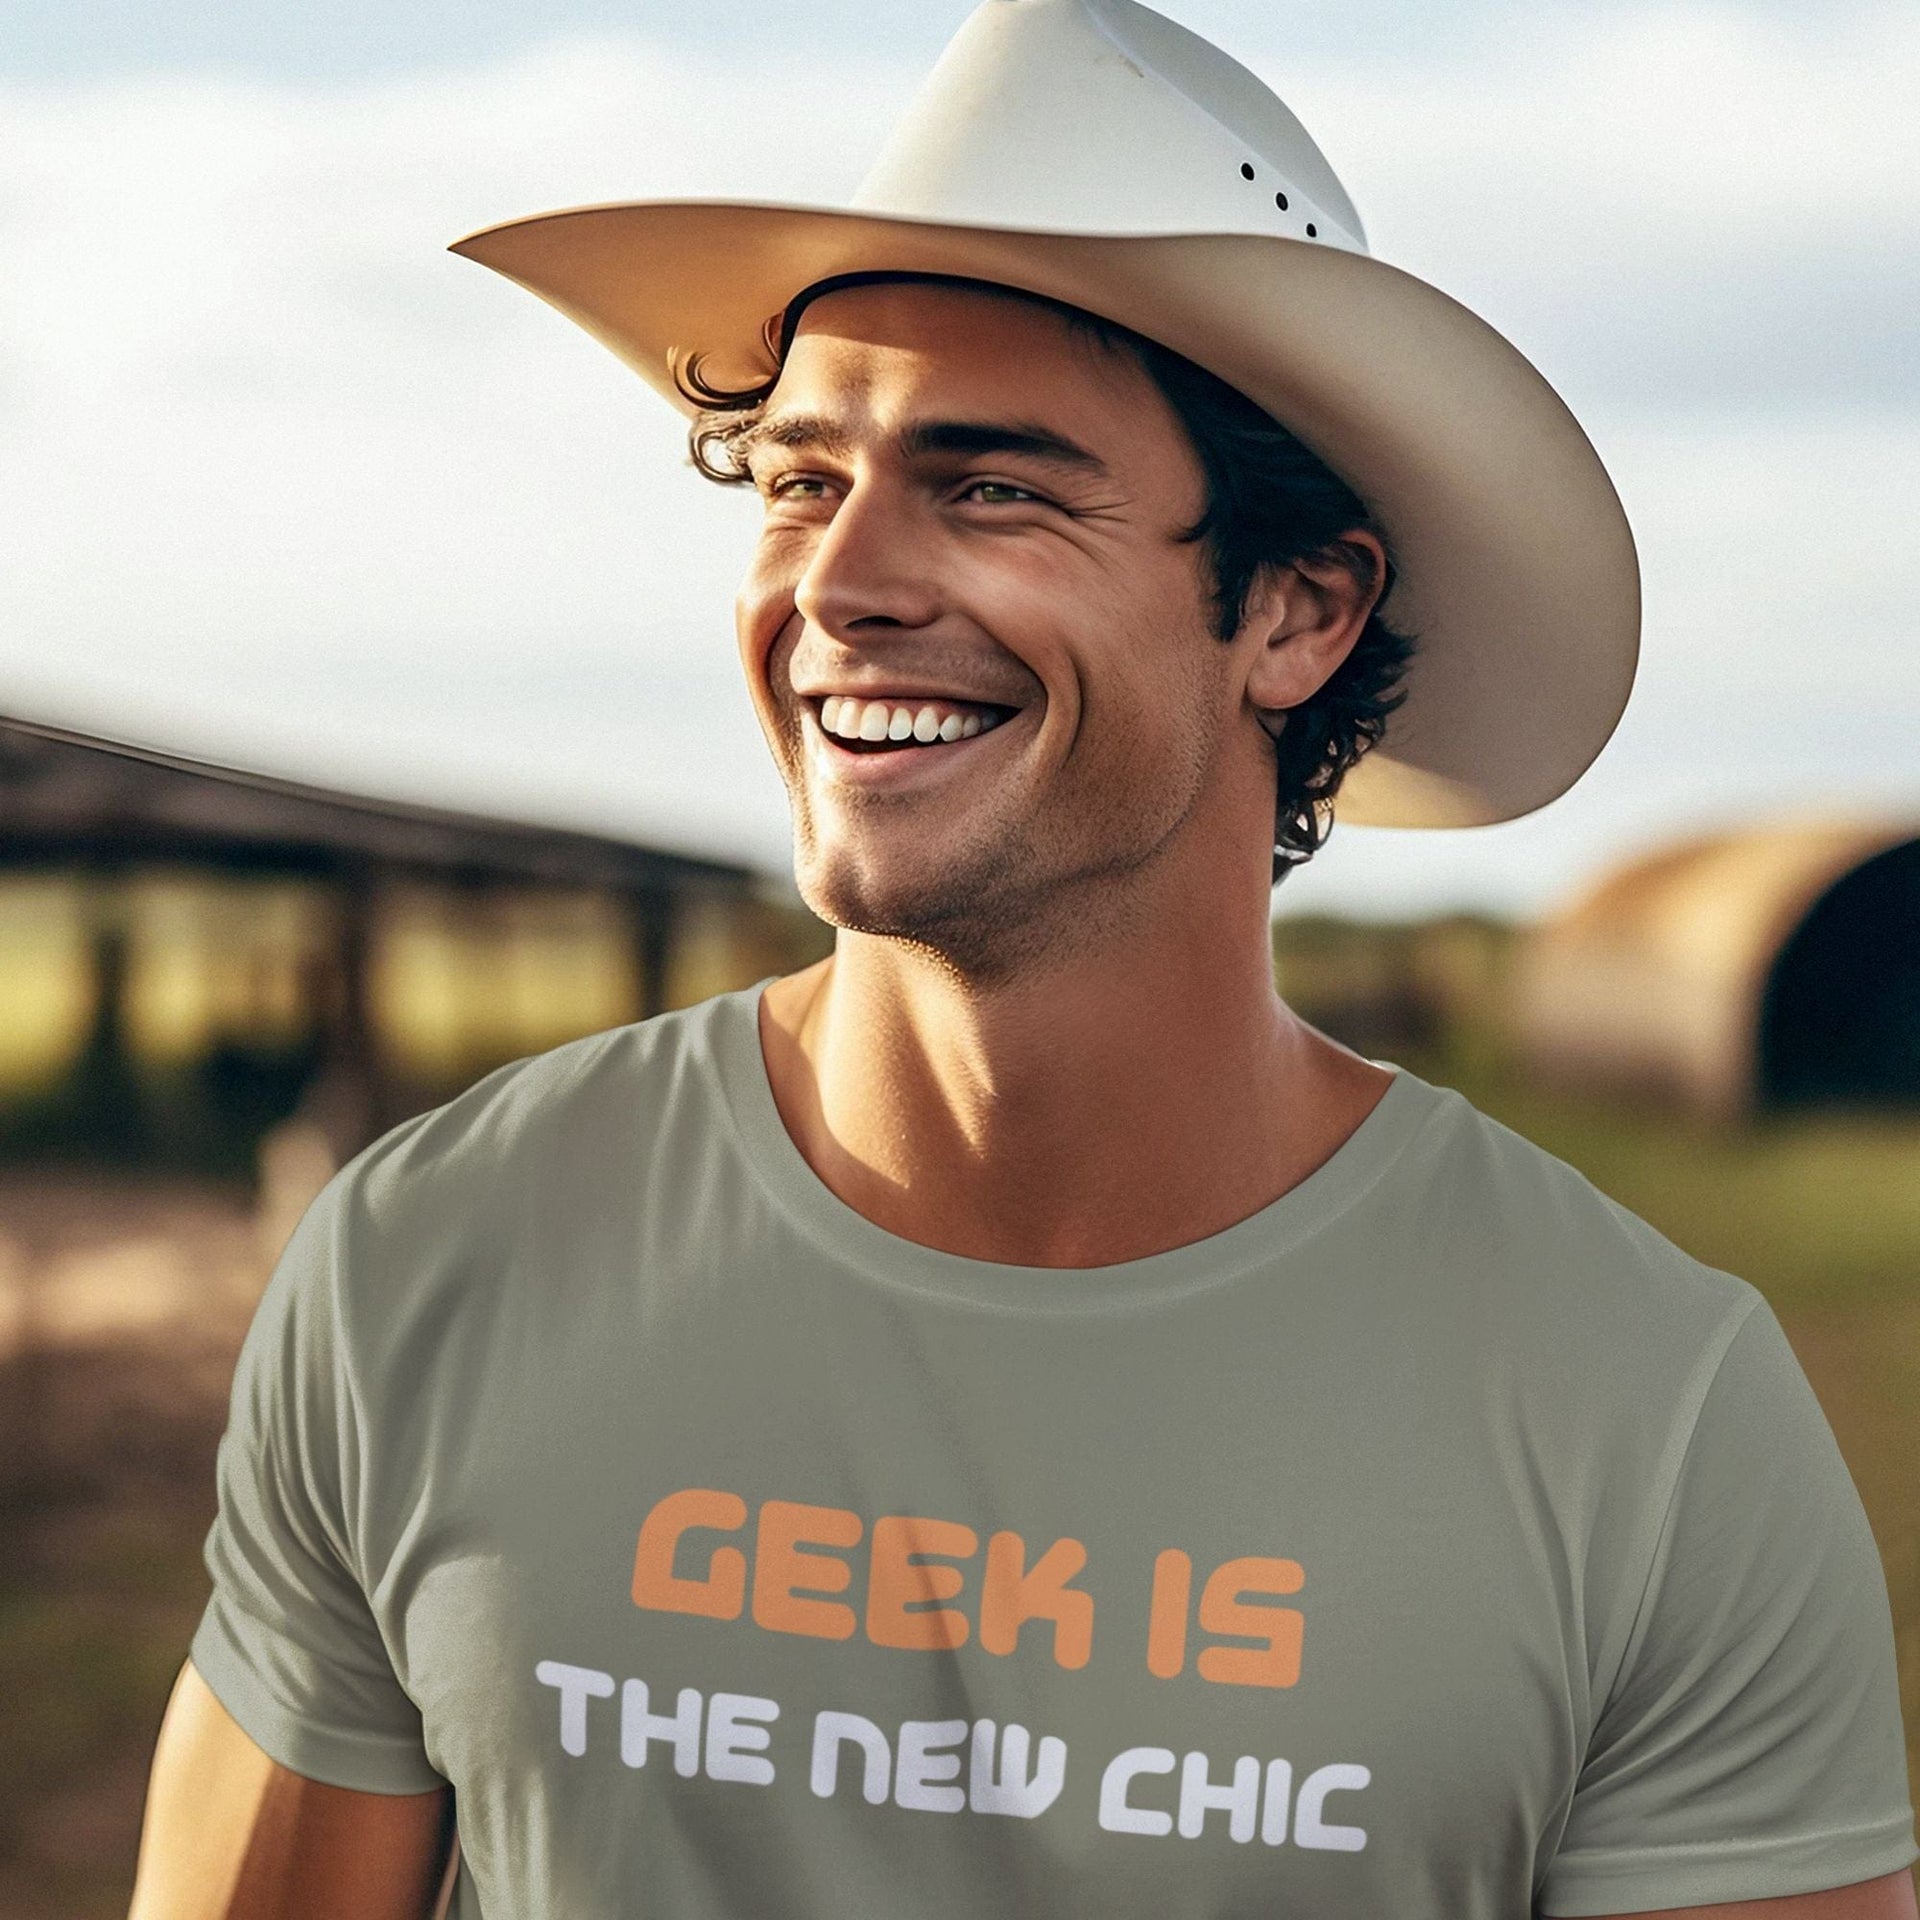 Geek is the New Chic - Men's T-Shirt